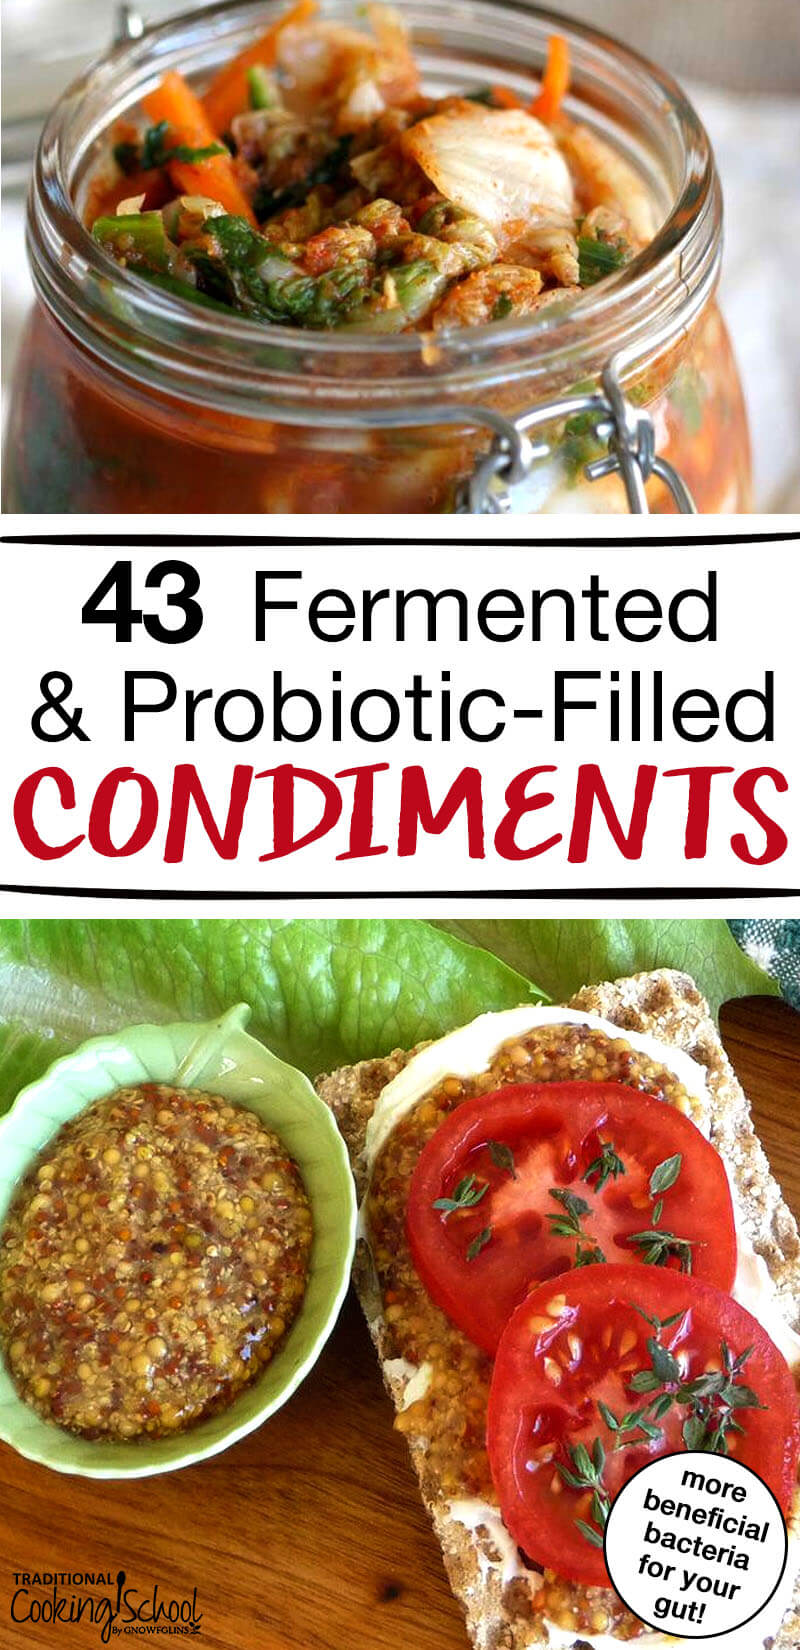 43 Fermented and Probiotic-Filled Condiments | Your family just. doesn't. like. them. Like what? Fermented foods. I know... shocking. ;) Yet, actually, this is very common! So I'm bound and determined to help you succeed! Let's continue on our ever-important quest to add more beneficial bacteria to our guts, this time with 43 probiotic-filled, fermented condiments! Because, for real, who doesn't like ketchup? | TraditionalCookingSchool.com